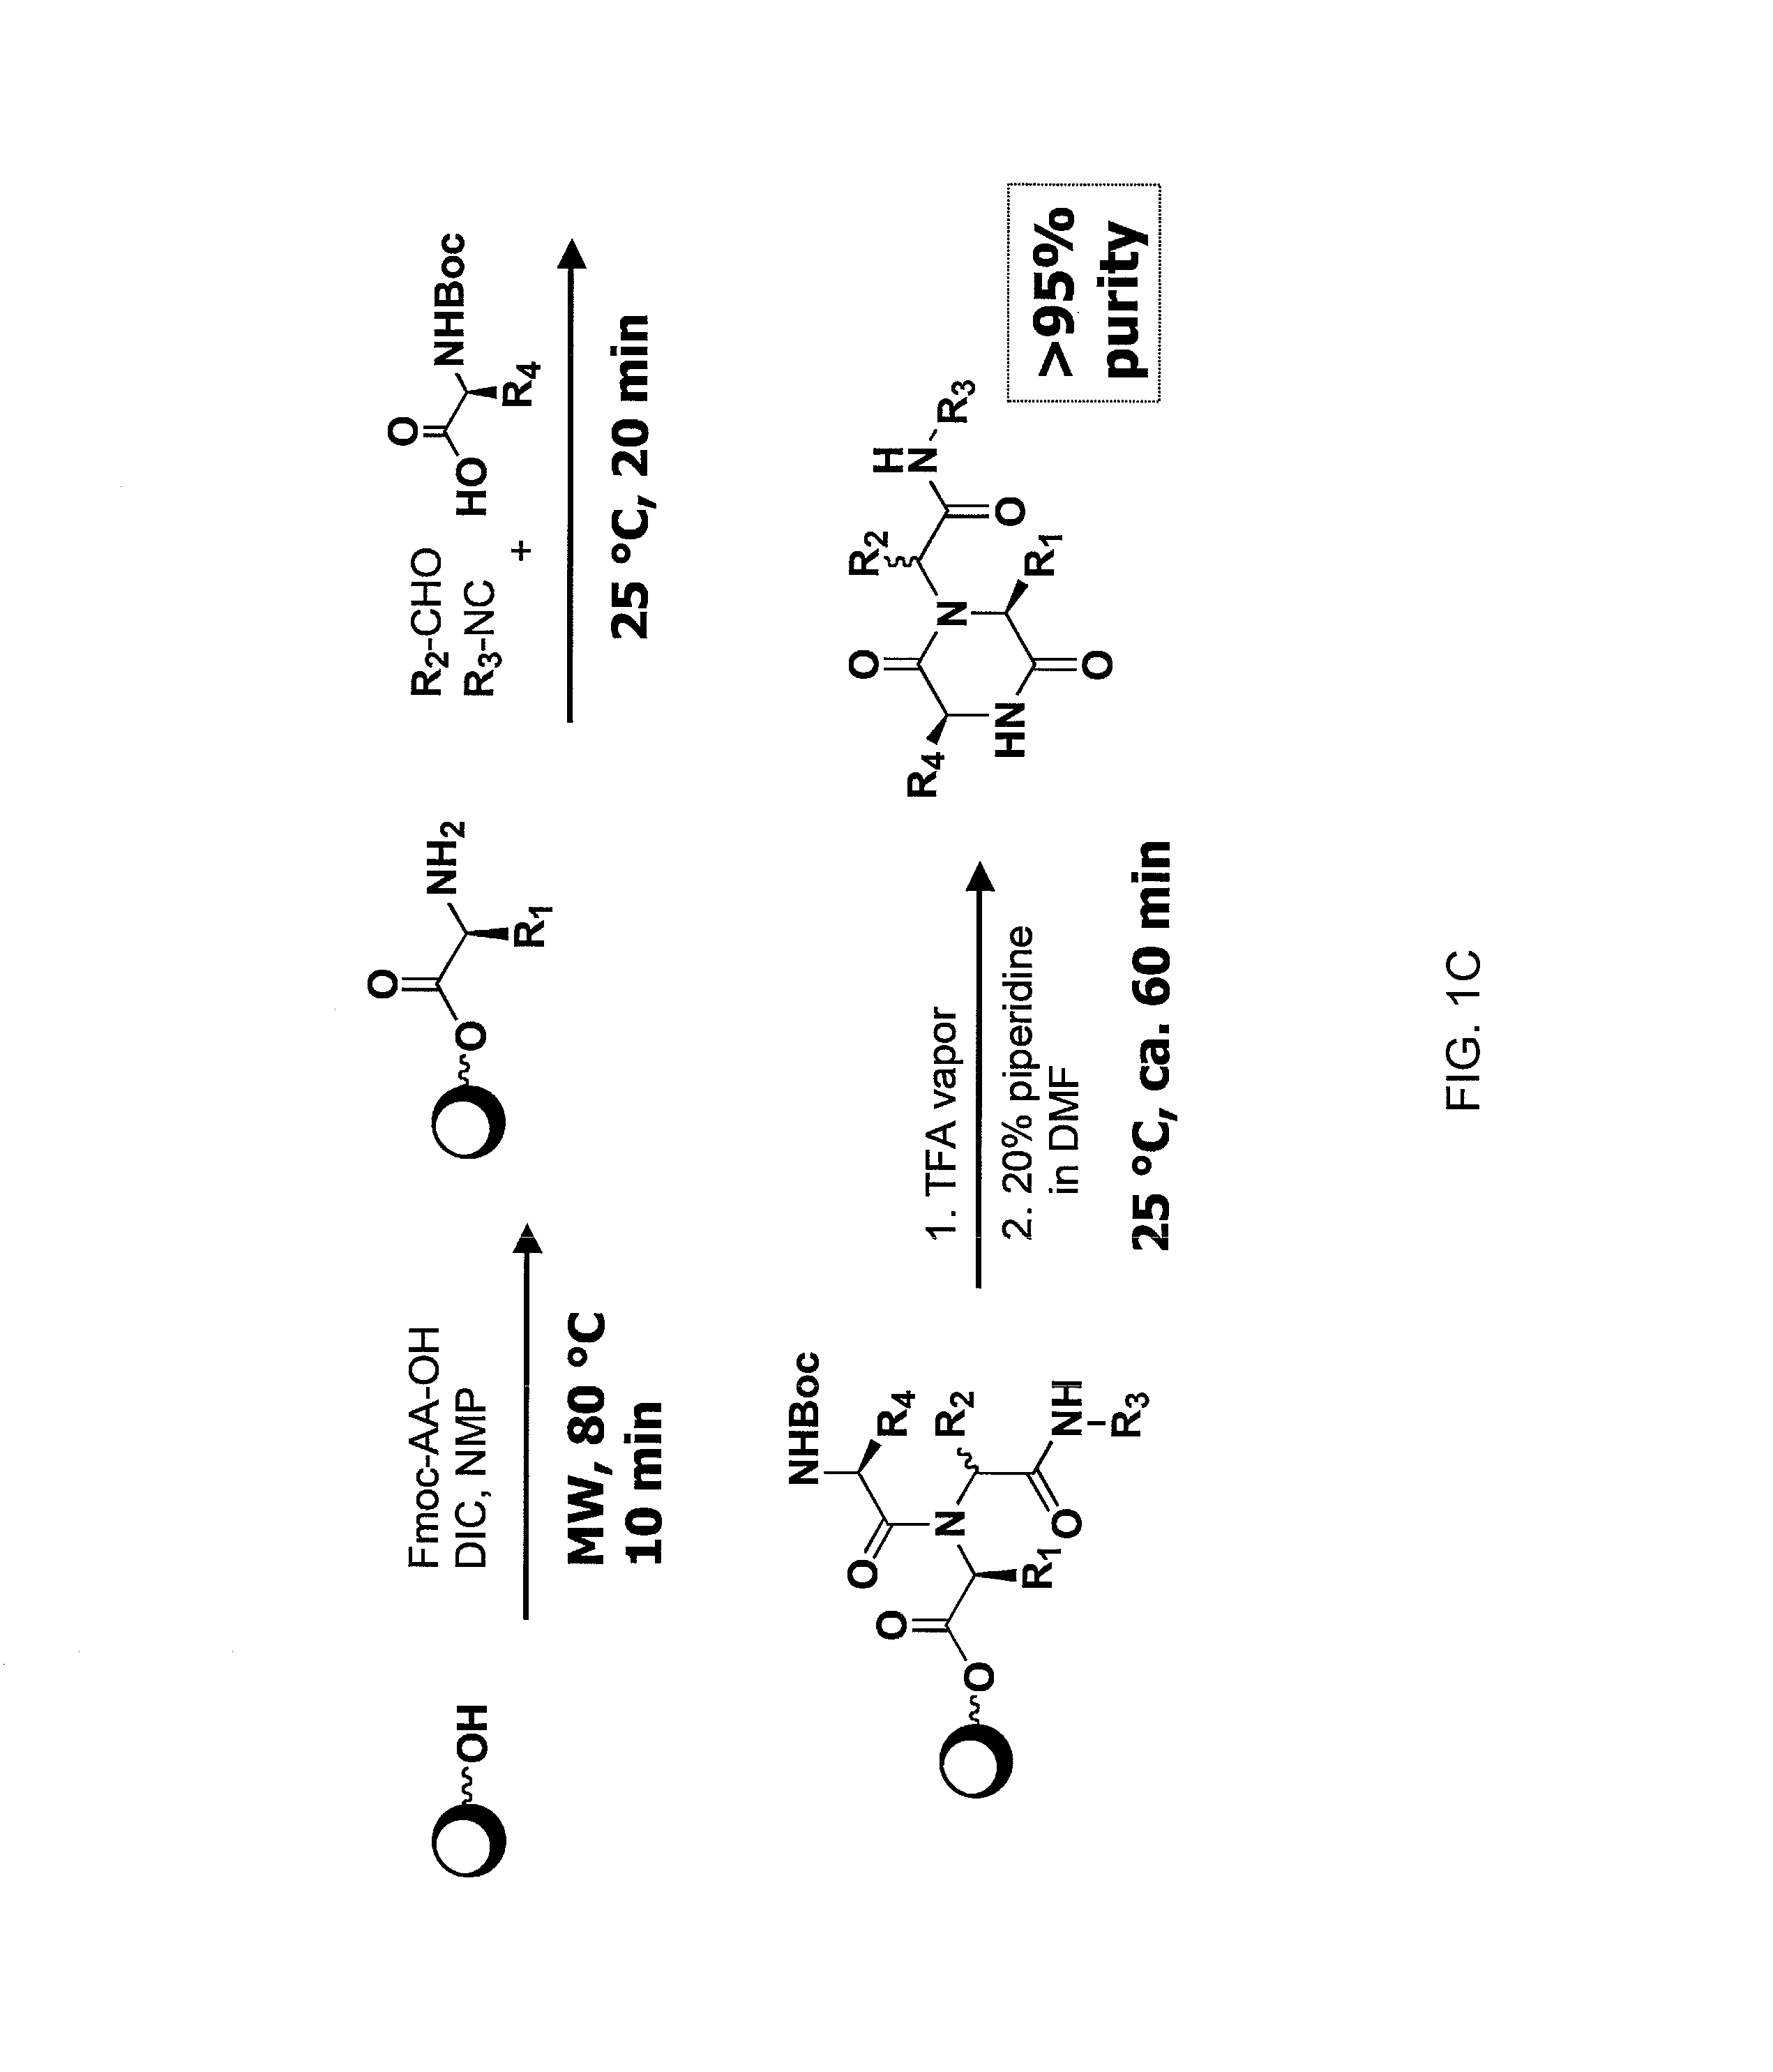 Compounds and methods for modulating communication and virulence in quorum sensing bacteria